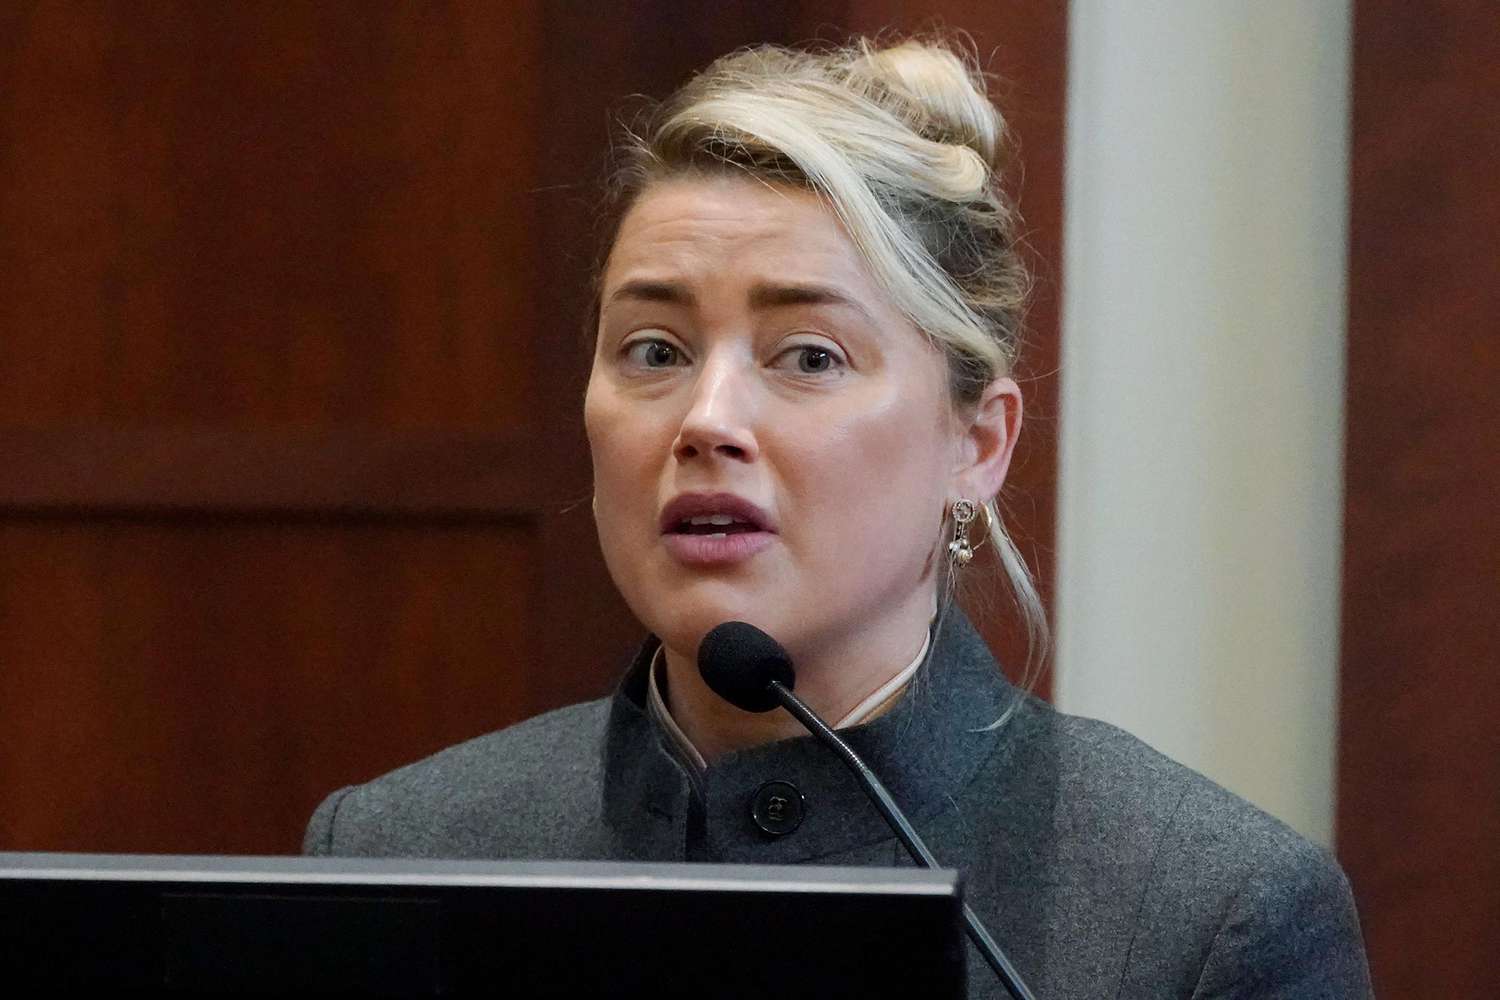 Actor Amber Heard testifies in the courtroom at the Fairfax County Circuit Courthouse in Fairfax, Virginia, on May 16, 2022.